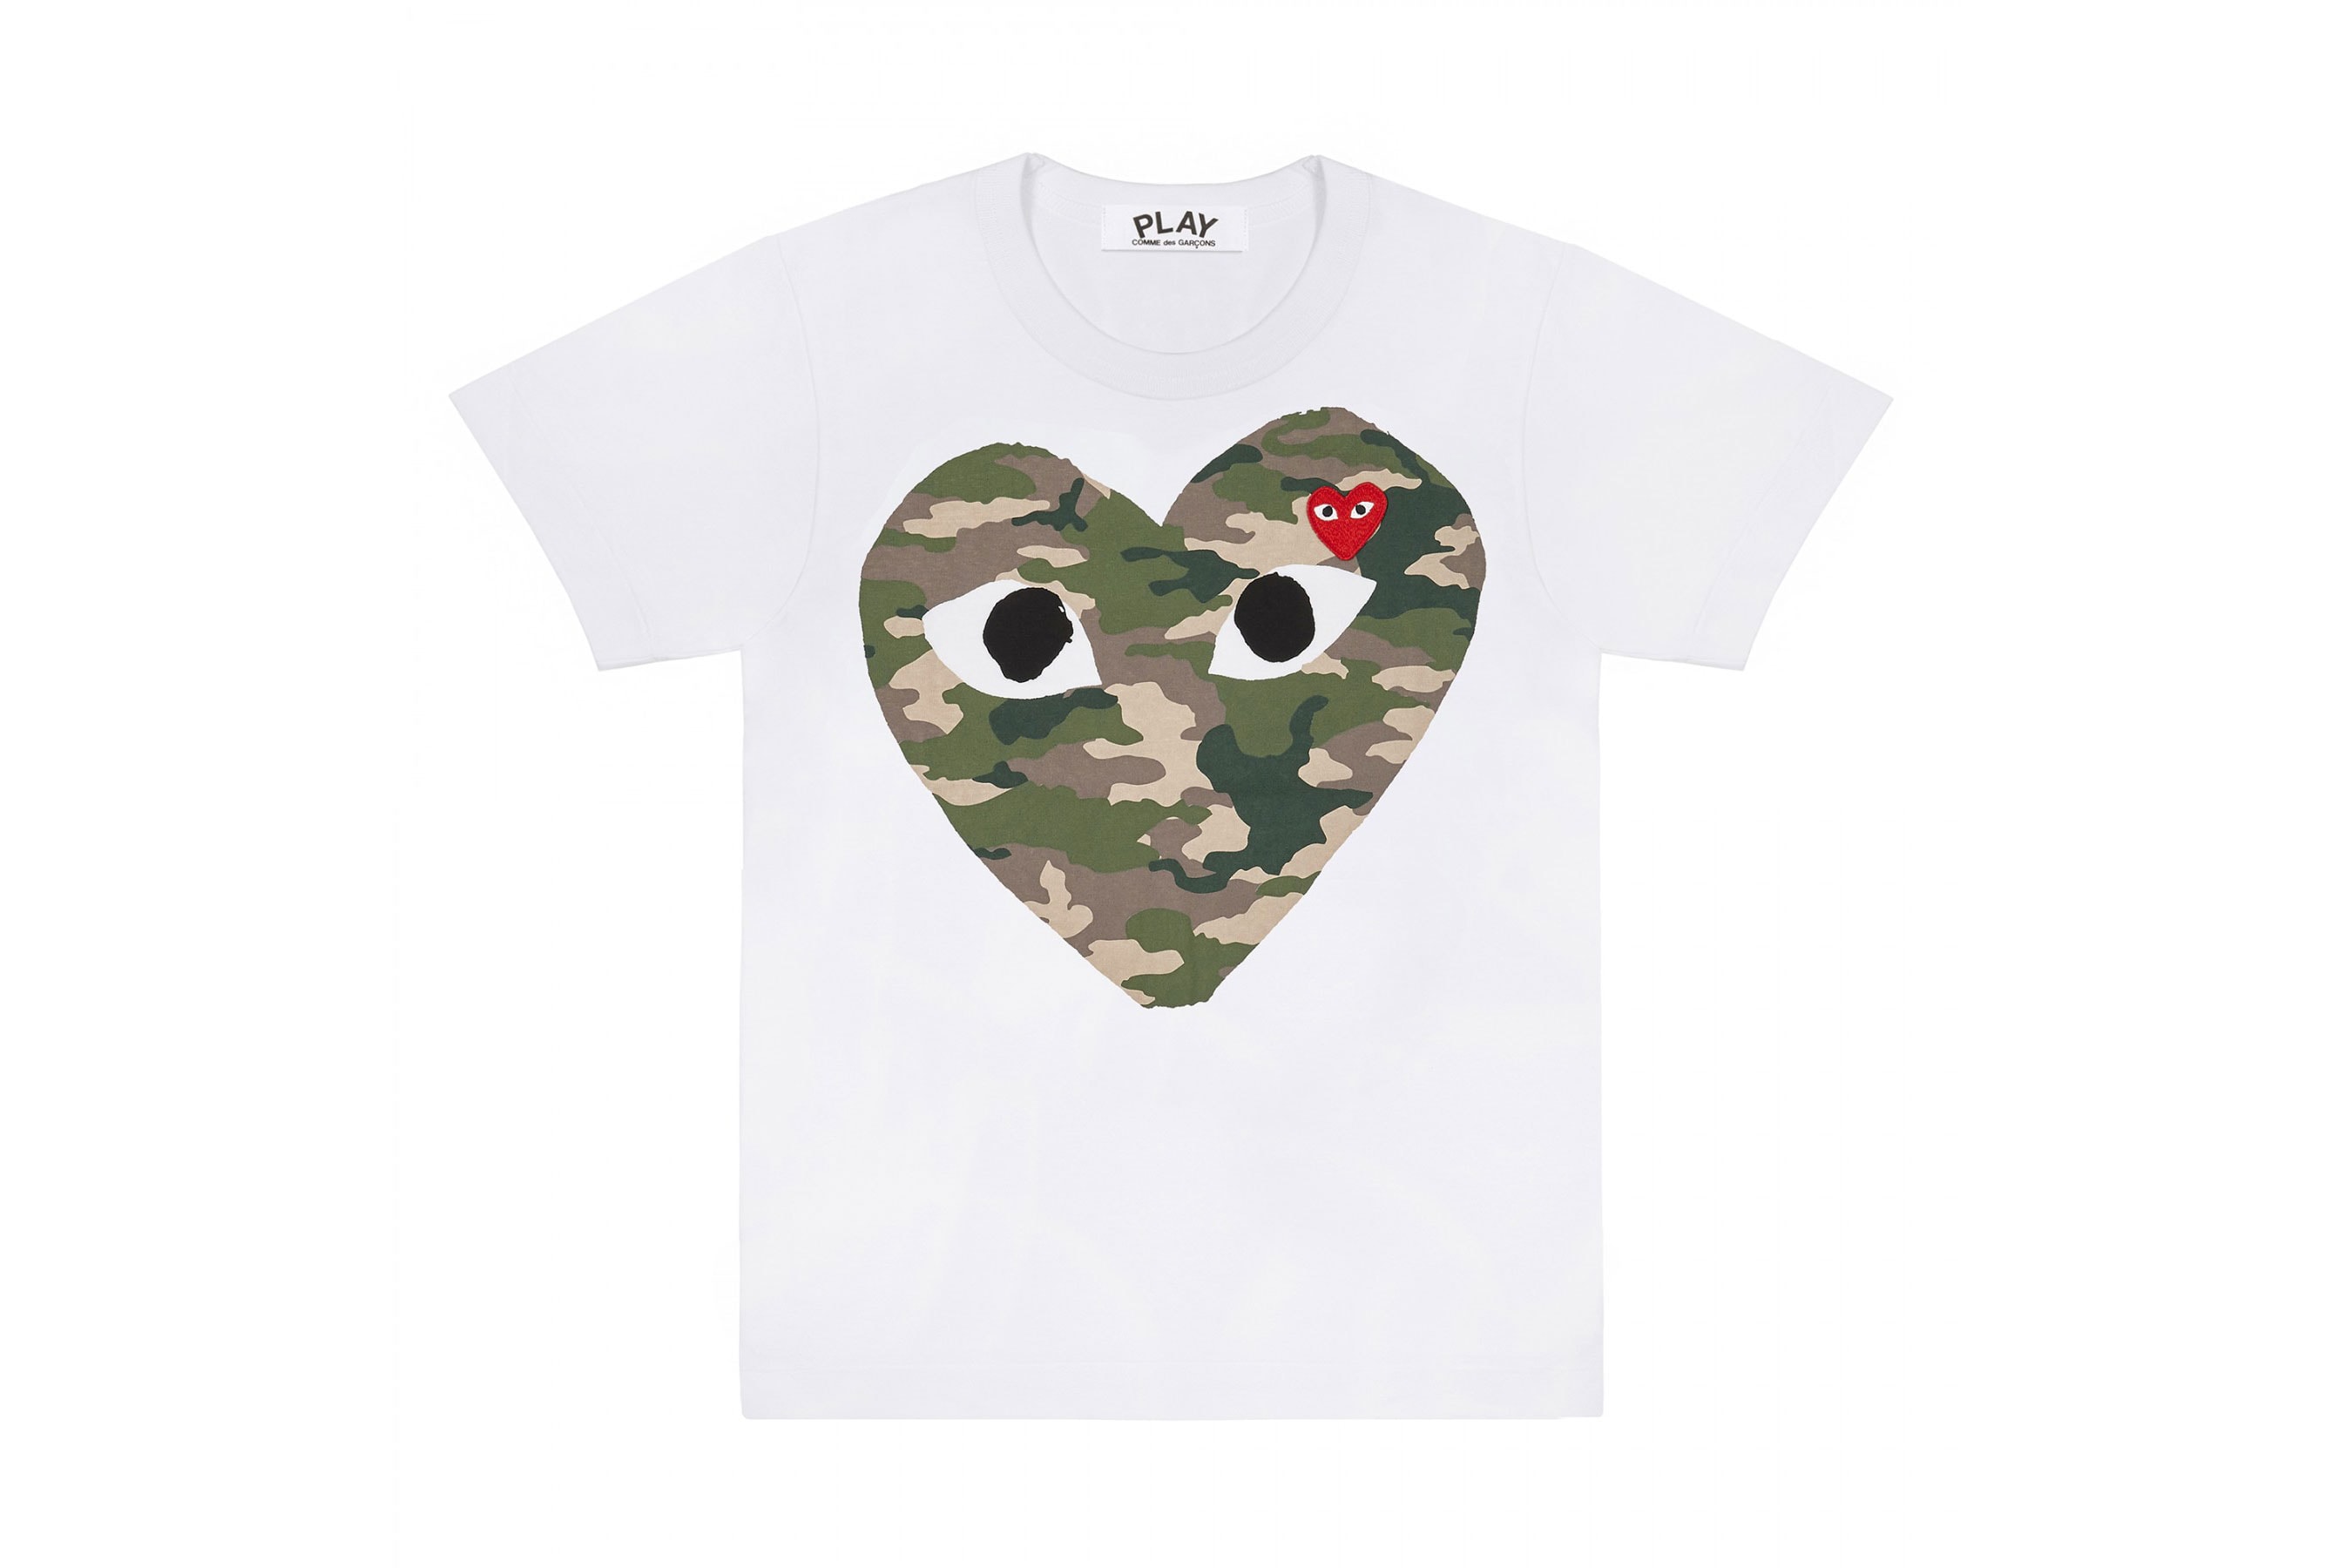 Dover Market Street Drops CDG 2018 New Arrivals Play Comme des Garçons New Play CDG Camouflage and Polka Dot T-Shirts Junya Watanabe Man x Carhartt  Junya Watanabe Man x Carhartt DSML  Richardson x DSM Hardware Specials Judy Blume Undercover x Levi's